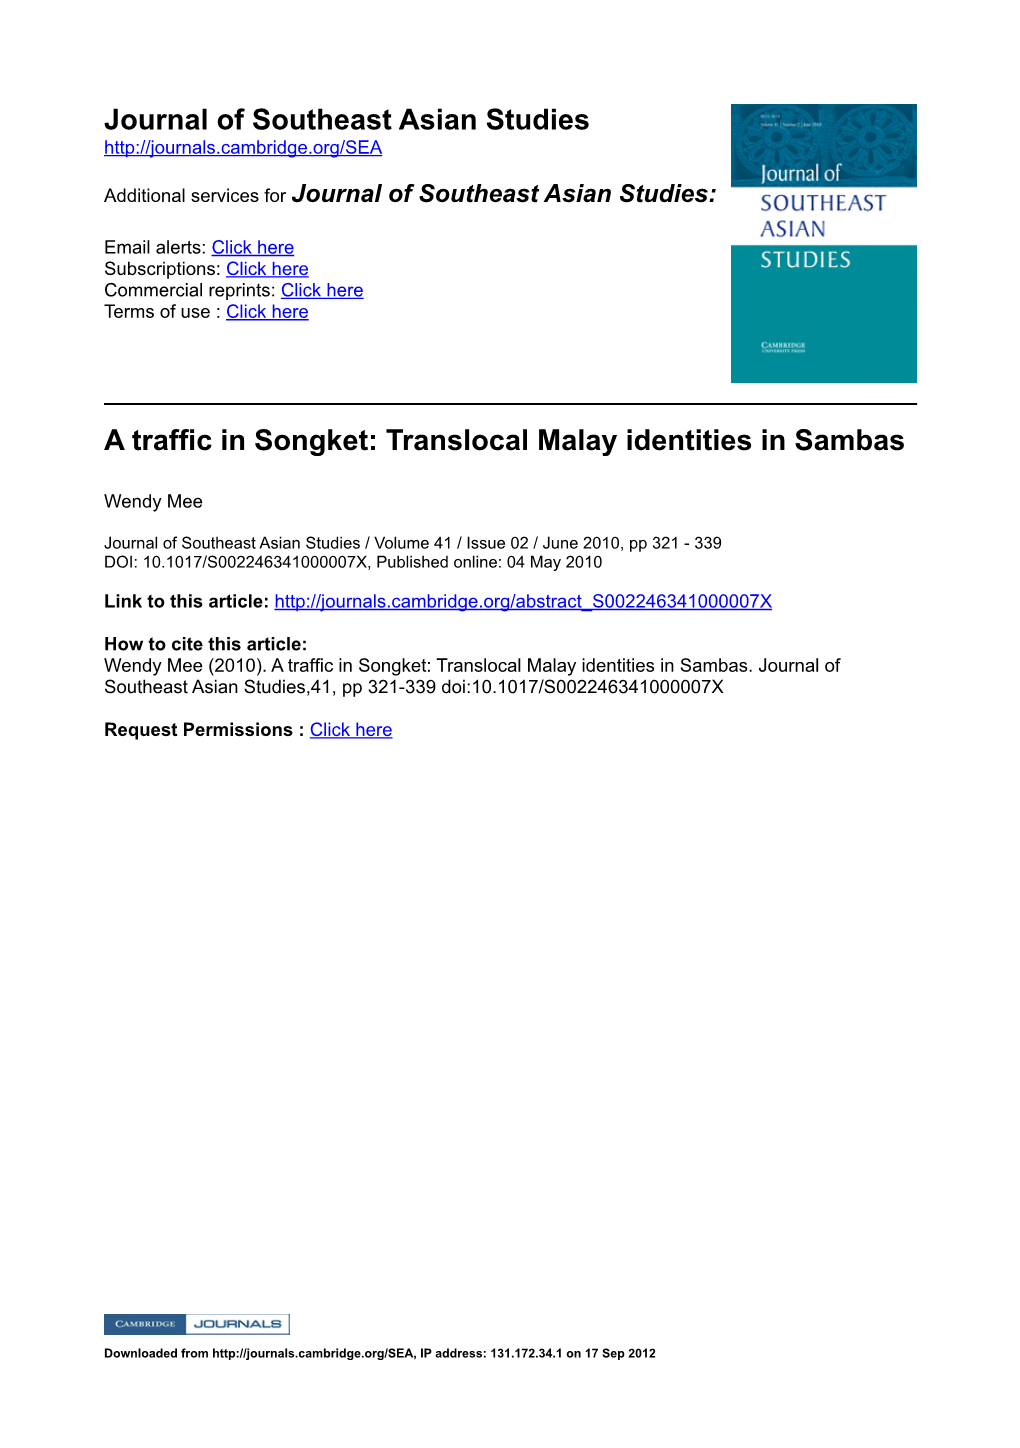 Journal of Southeast Asian Studies a Traffic in Songket: Translocal Malay